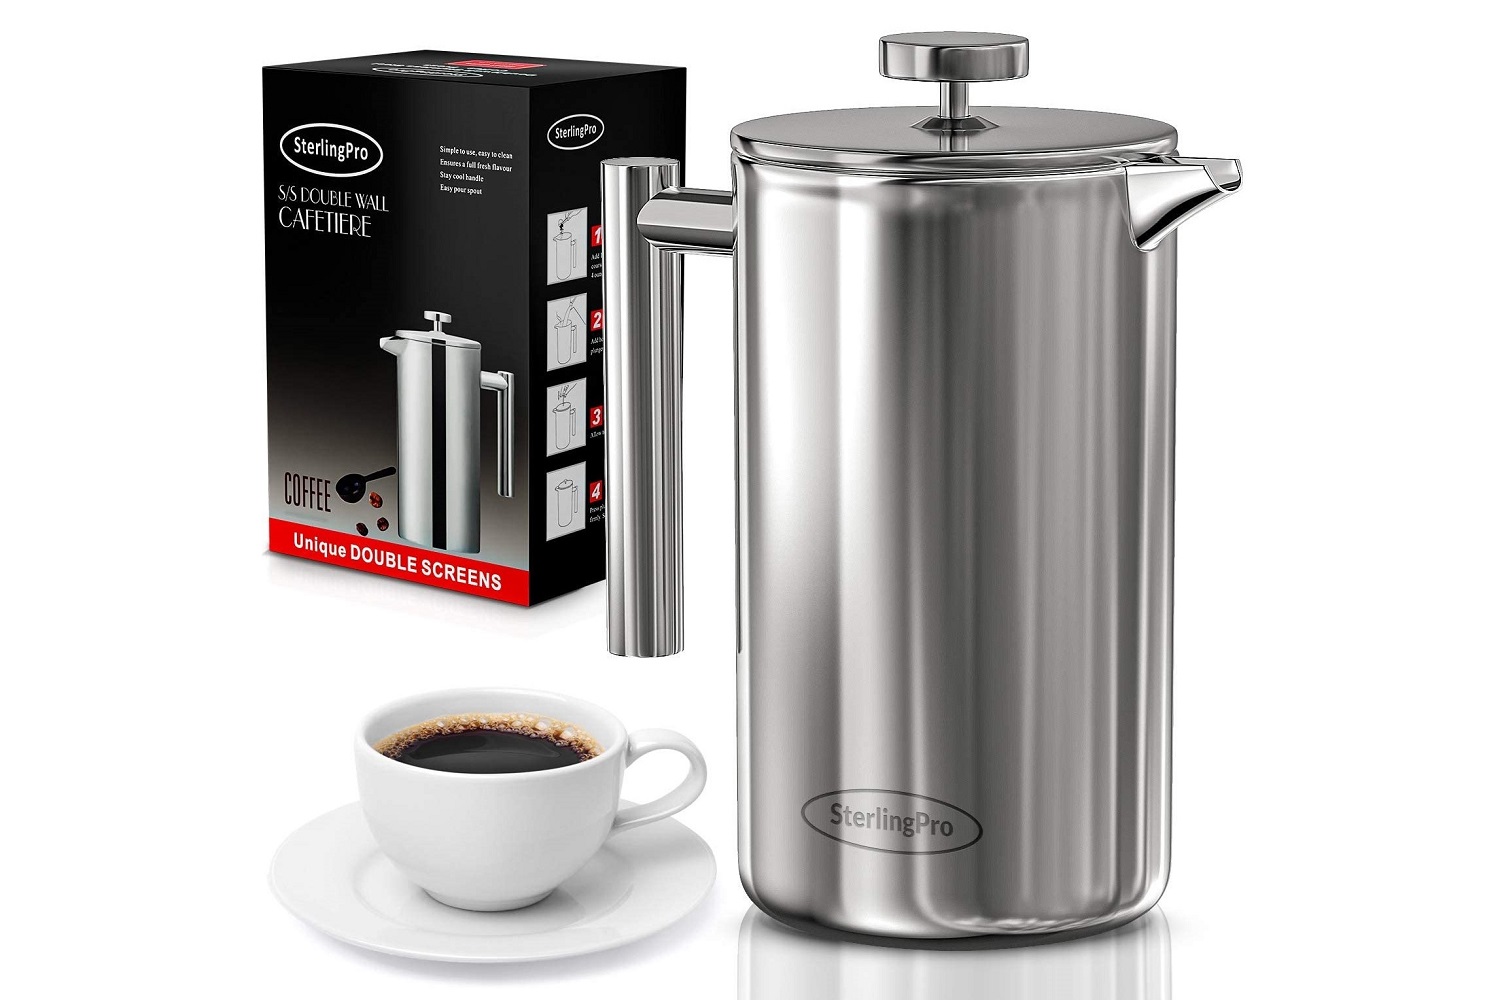 https://www.themanual.com/wp-content/uploads/sites/9/2020/09/sterlingpro-double-wall-french-press.jpg?fit=800%2C533&p=1